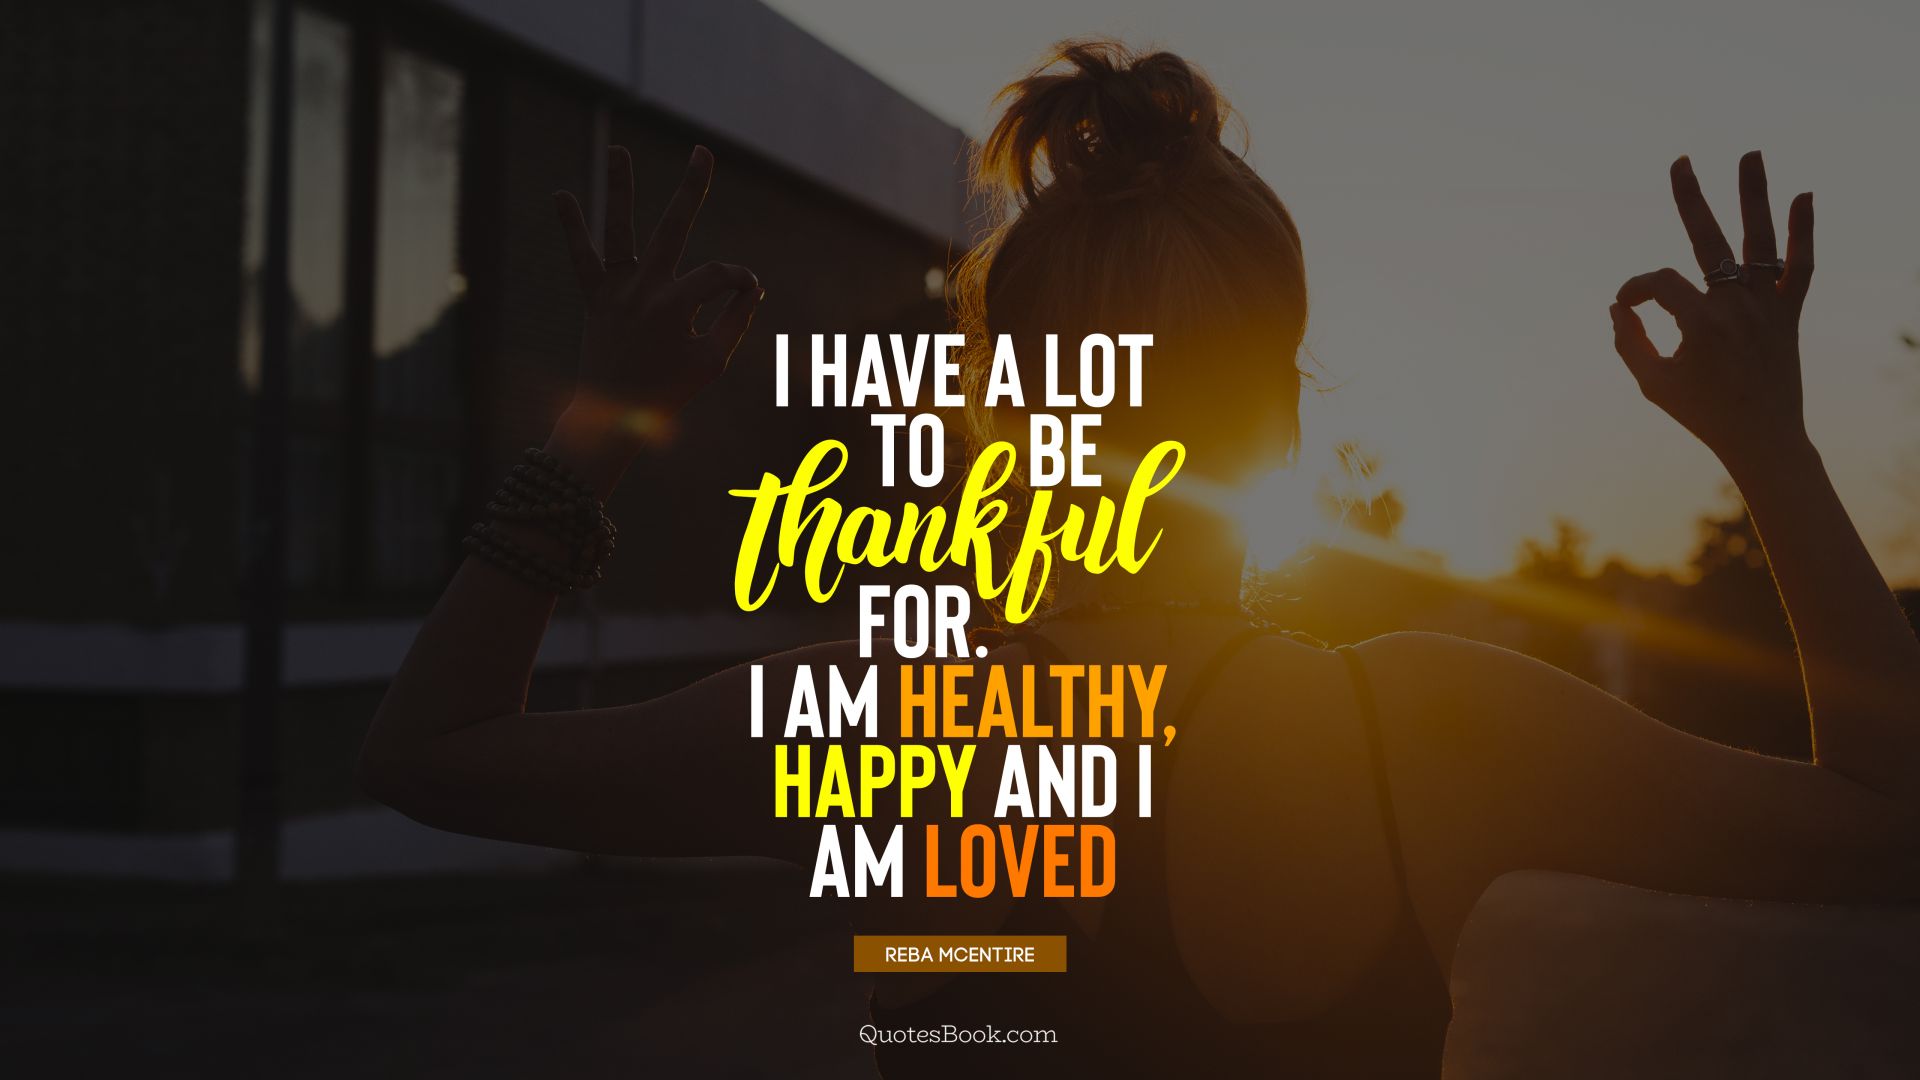 I have a lot to be thankful for. I am healthy, happy and I am loved. - Quote by Reba McEntire